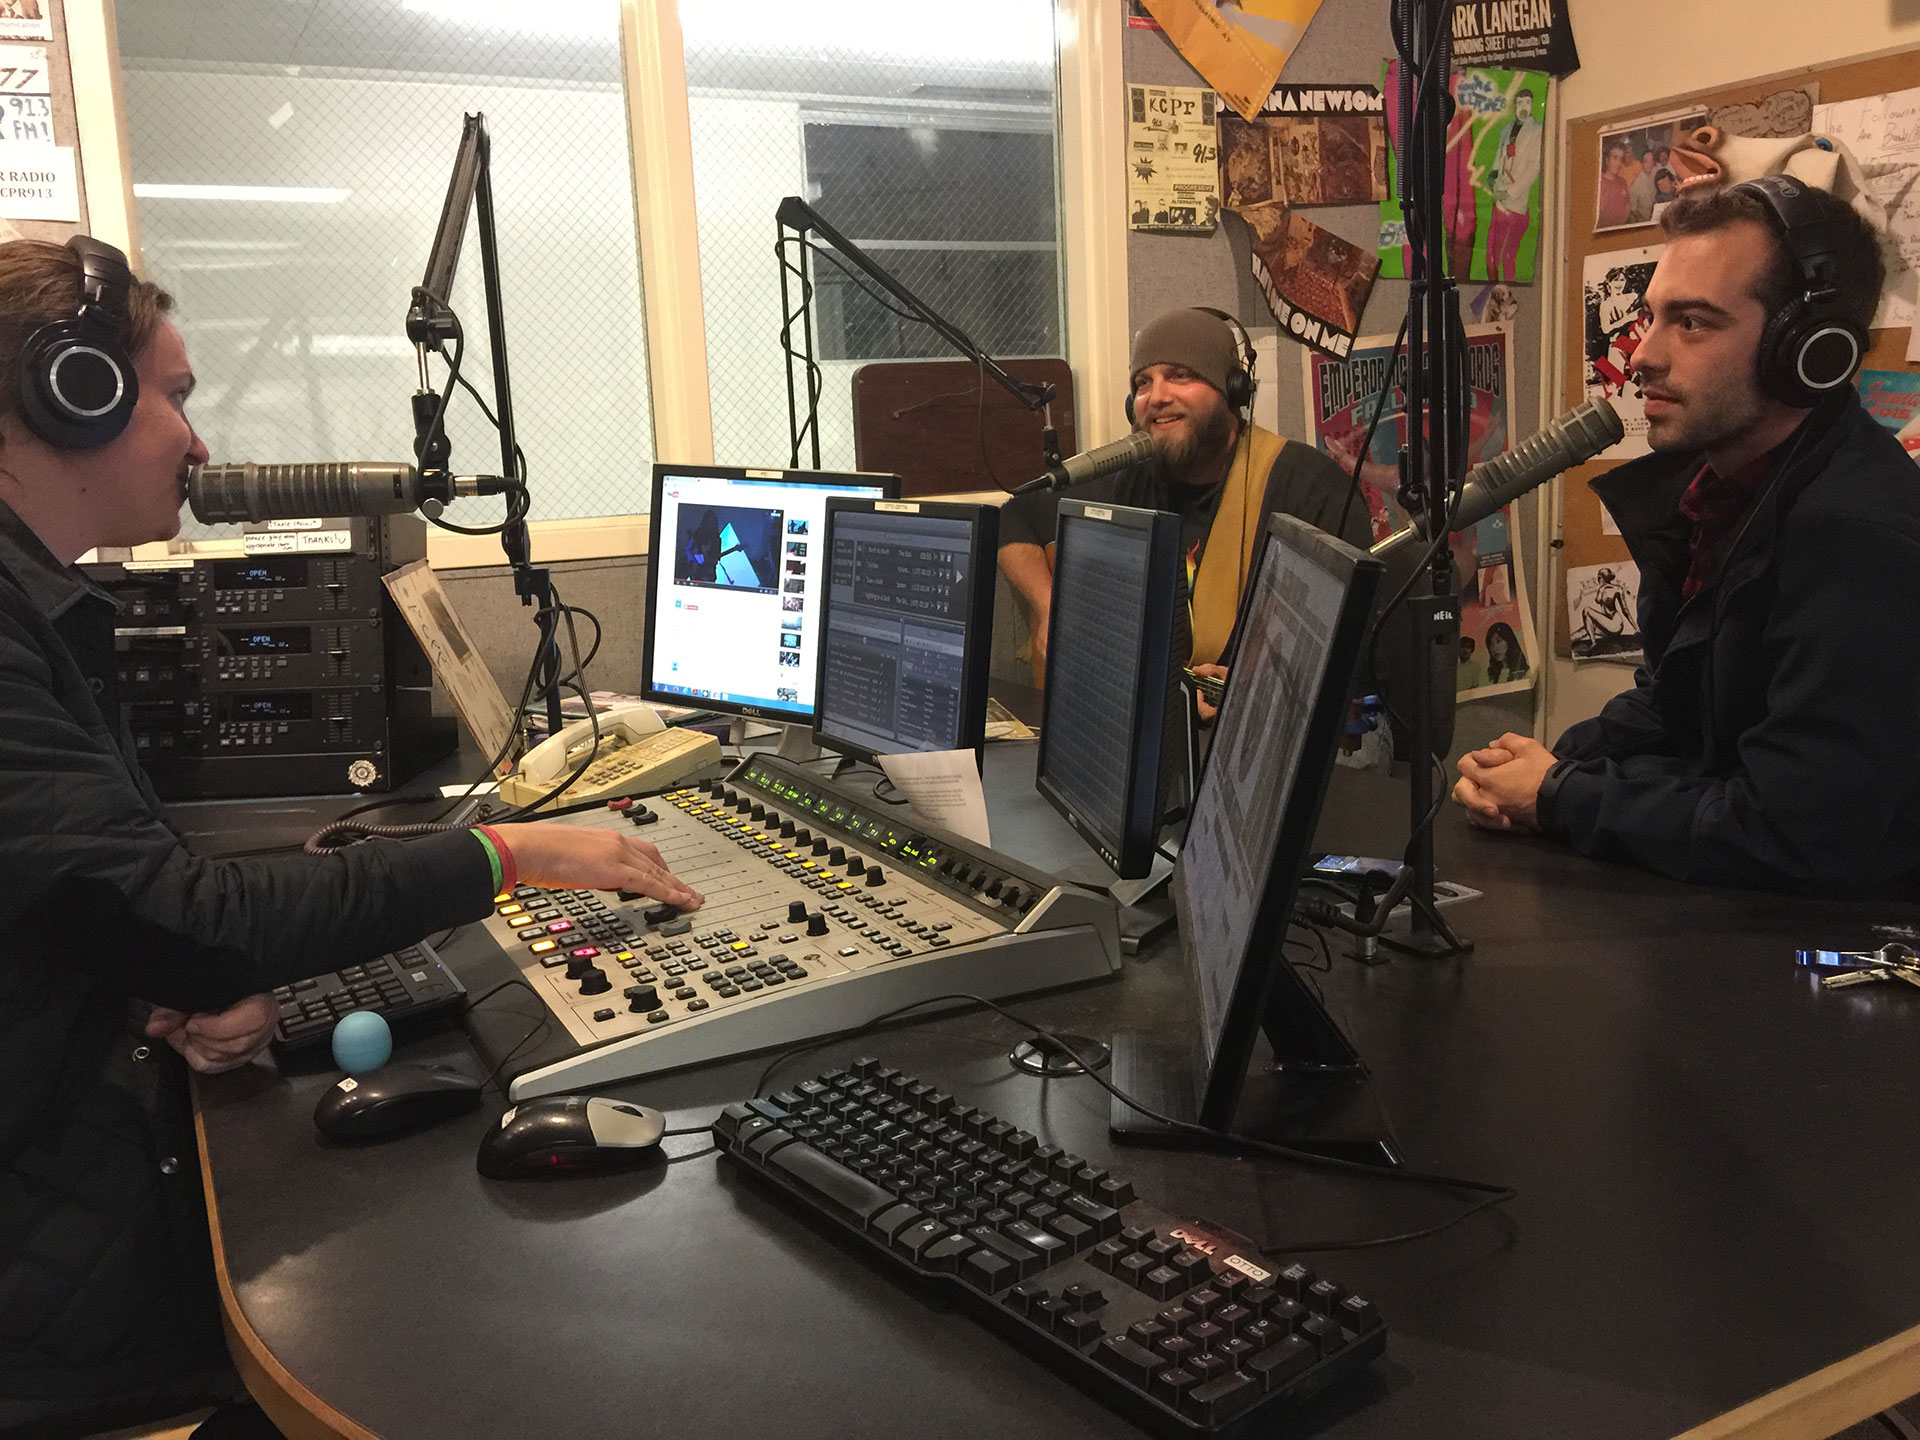 “Guitar Talk” is on every Monday from 6PM to 7PM. The January 26 show featured, from left to right, McQueen, local musician Matt Suarez and Garges. The show included some music but mostly covered topics like music festivals, different styles of Jazz and becoming famous on YouTube. 